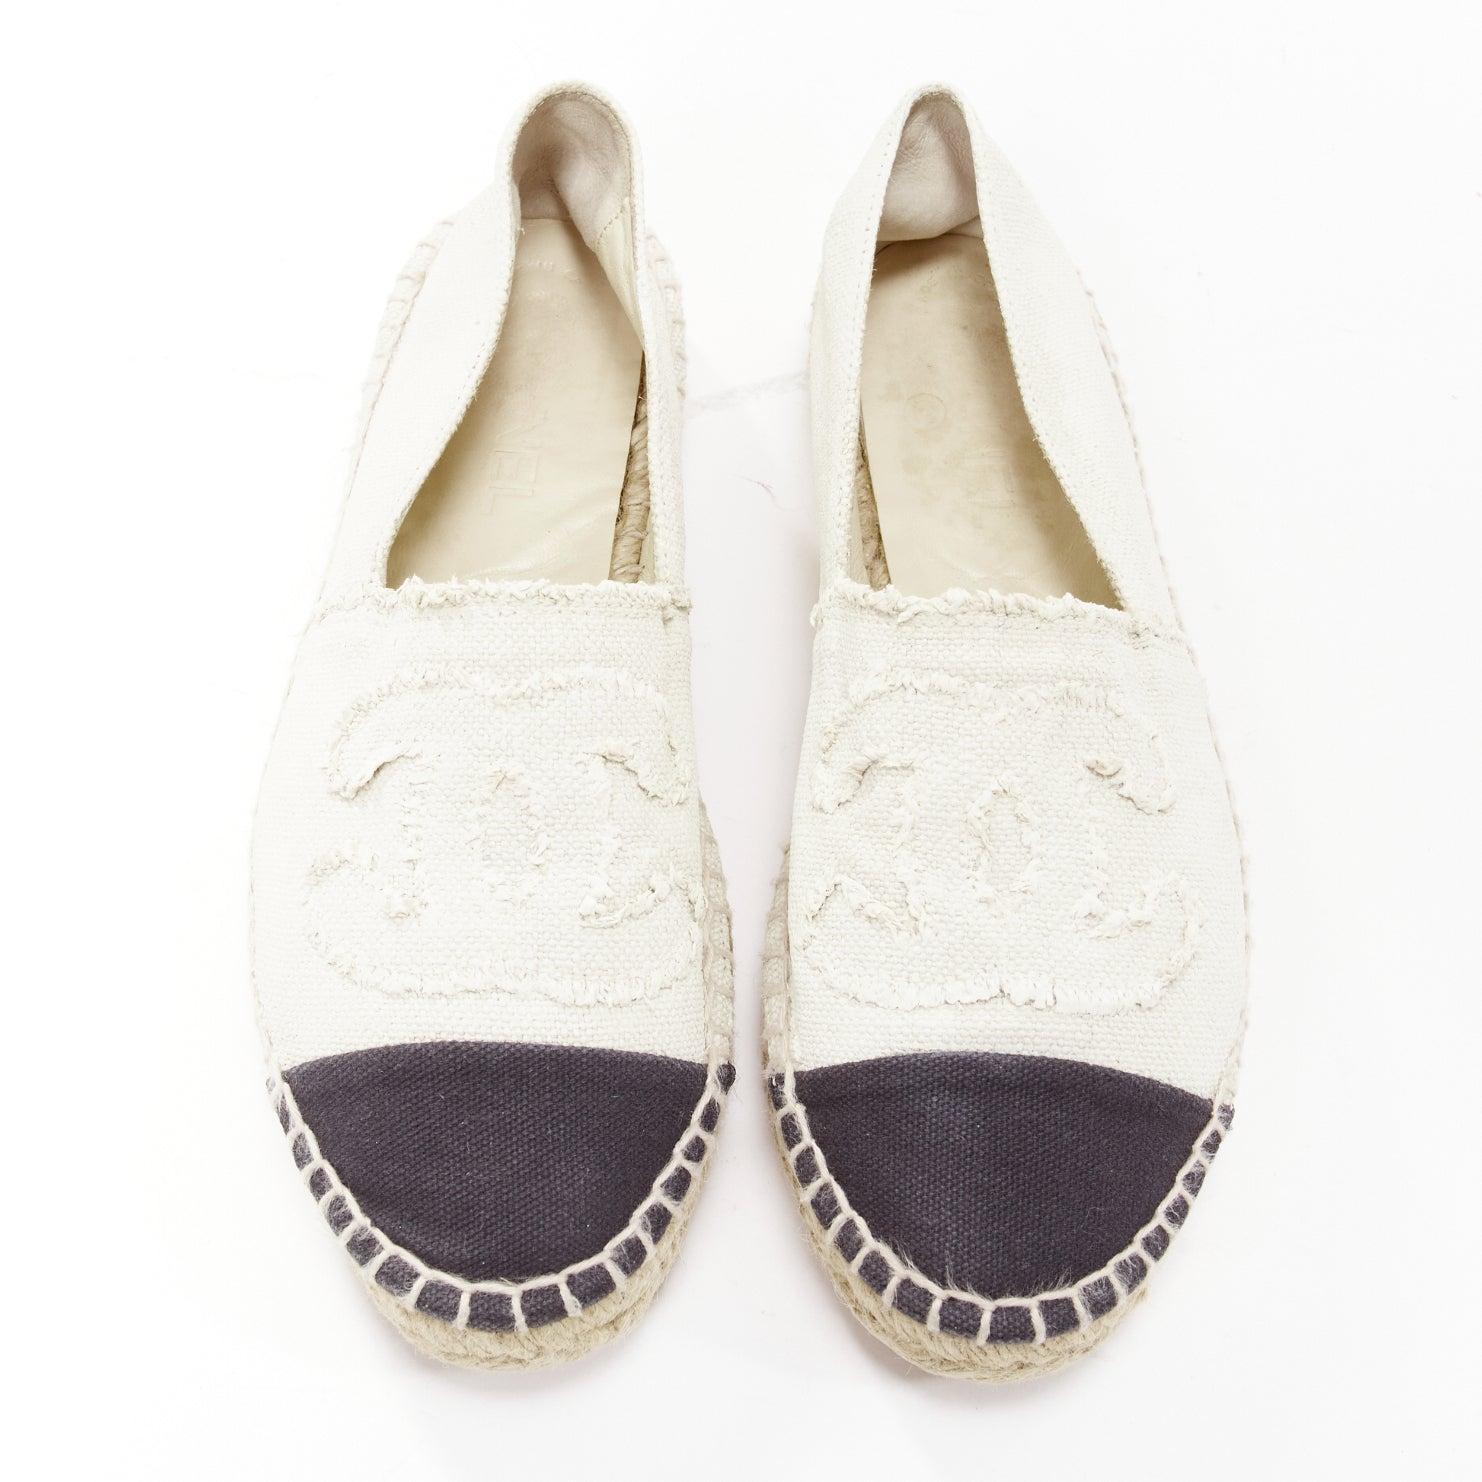 CHANEL beige CC logo fray edge canvas black toe cap espadrille shoes EU38
Reference: NILI/A00062
Brand: Chanel
Material: Canvas
Color: Nude, Black
Pattern: Logomania
Closure: Slip On
Lining: Nude Leather
Made in: Spain

CONDITION:
Condition: Good,